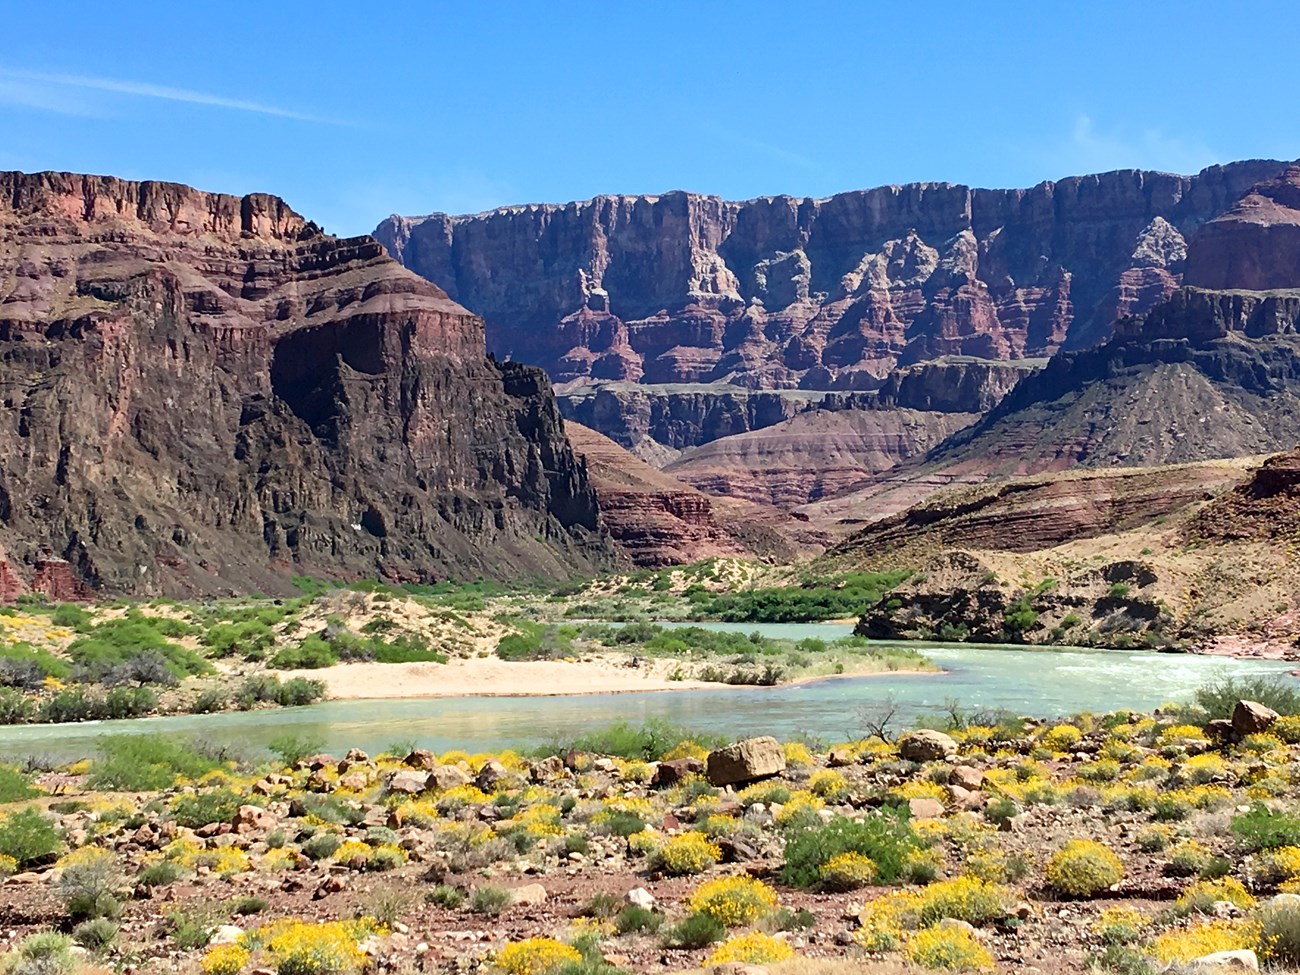 High, red and brown horizontally striped cliffs tower above a meandering turquoise river banked by yellow-flowered green bushes and cream-colored sand.